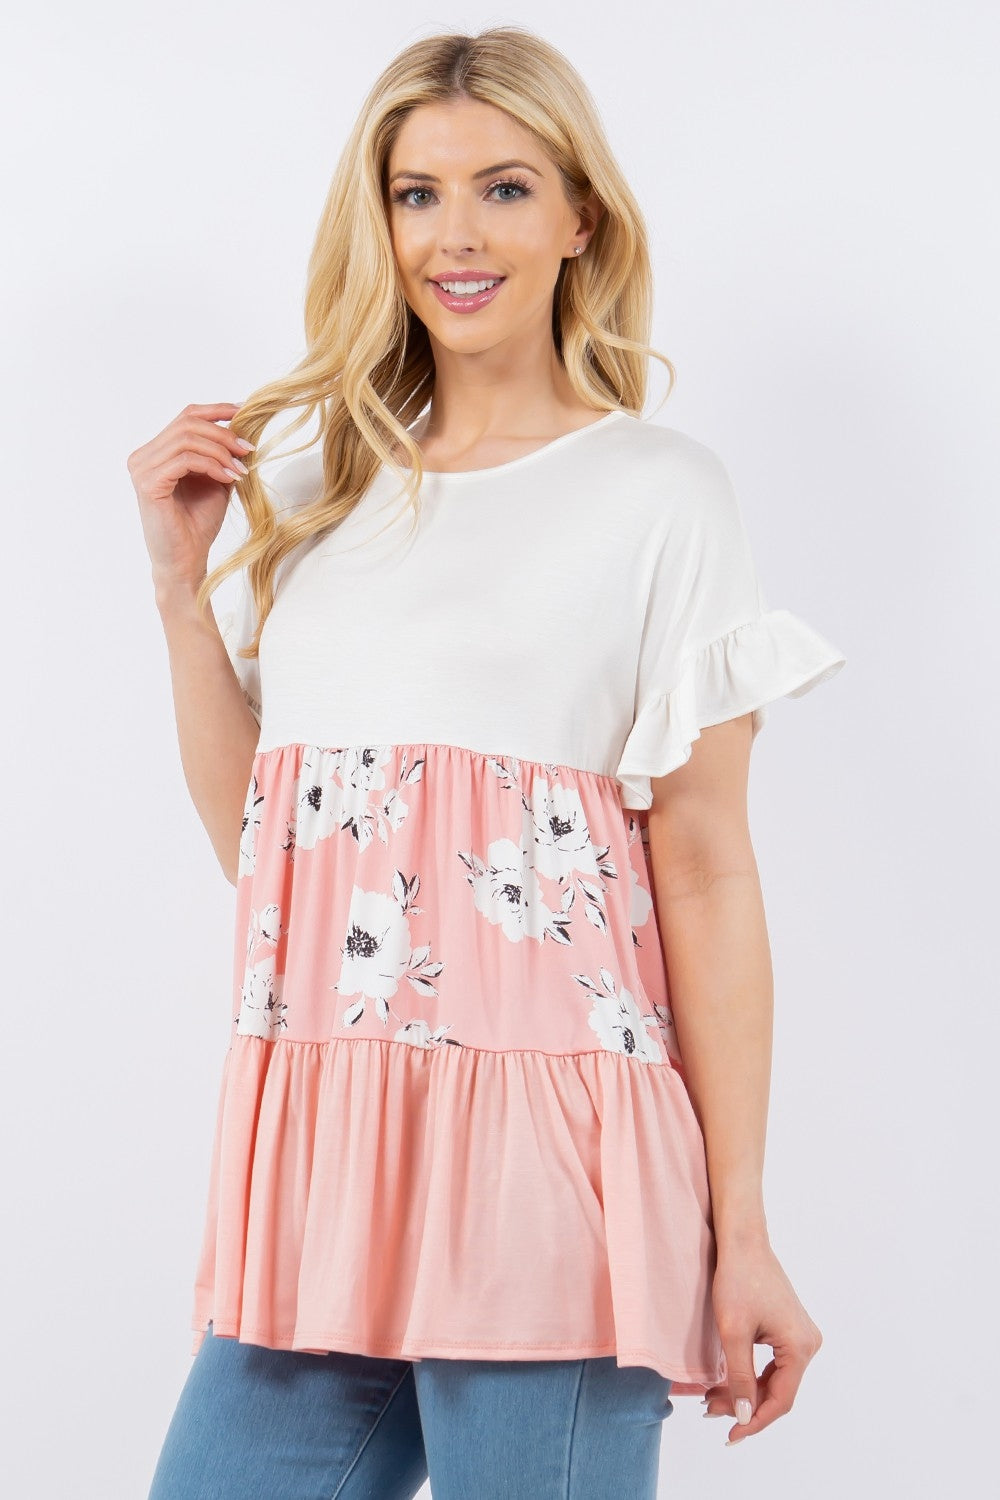 Sweet Floral Melody Top *2 colors*